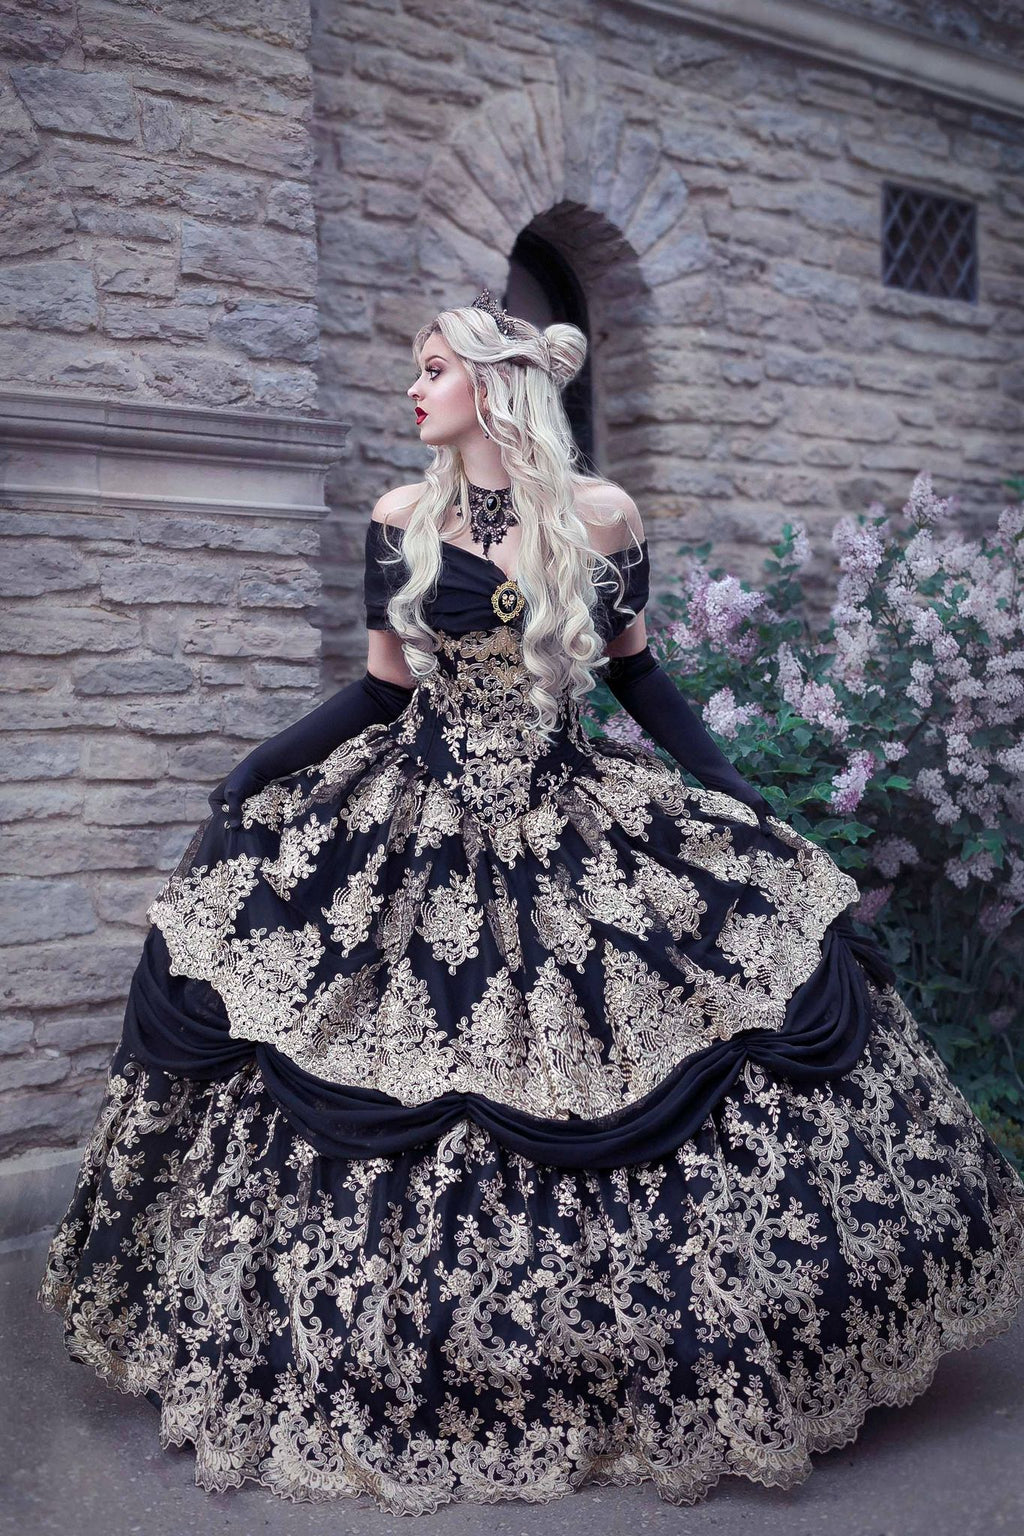 Gothic Victorian Dresses,Gothic Ball Gowns,Victorian Fashion at DevilNight  